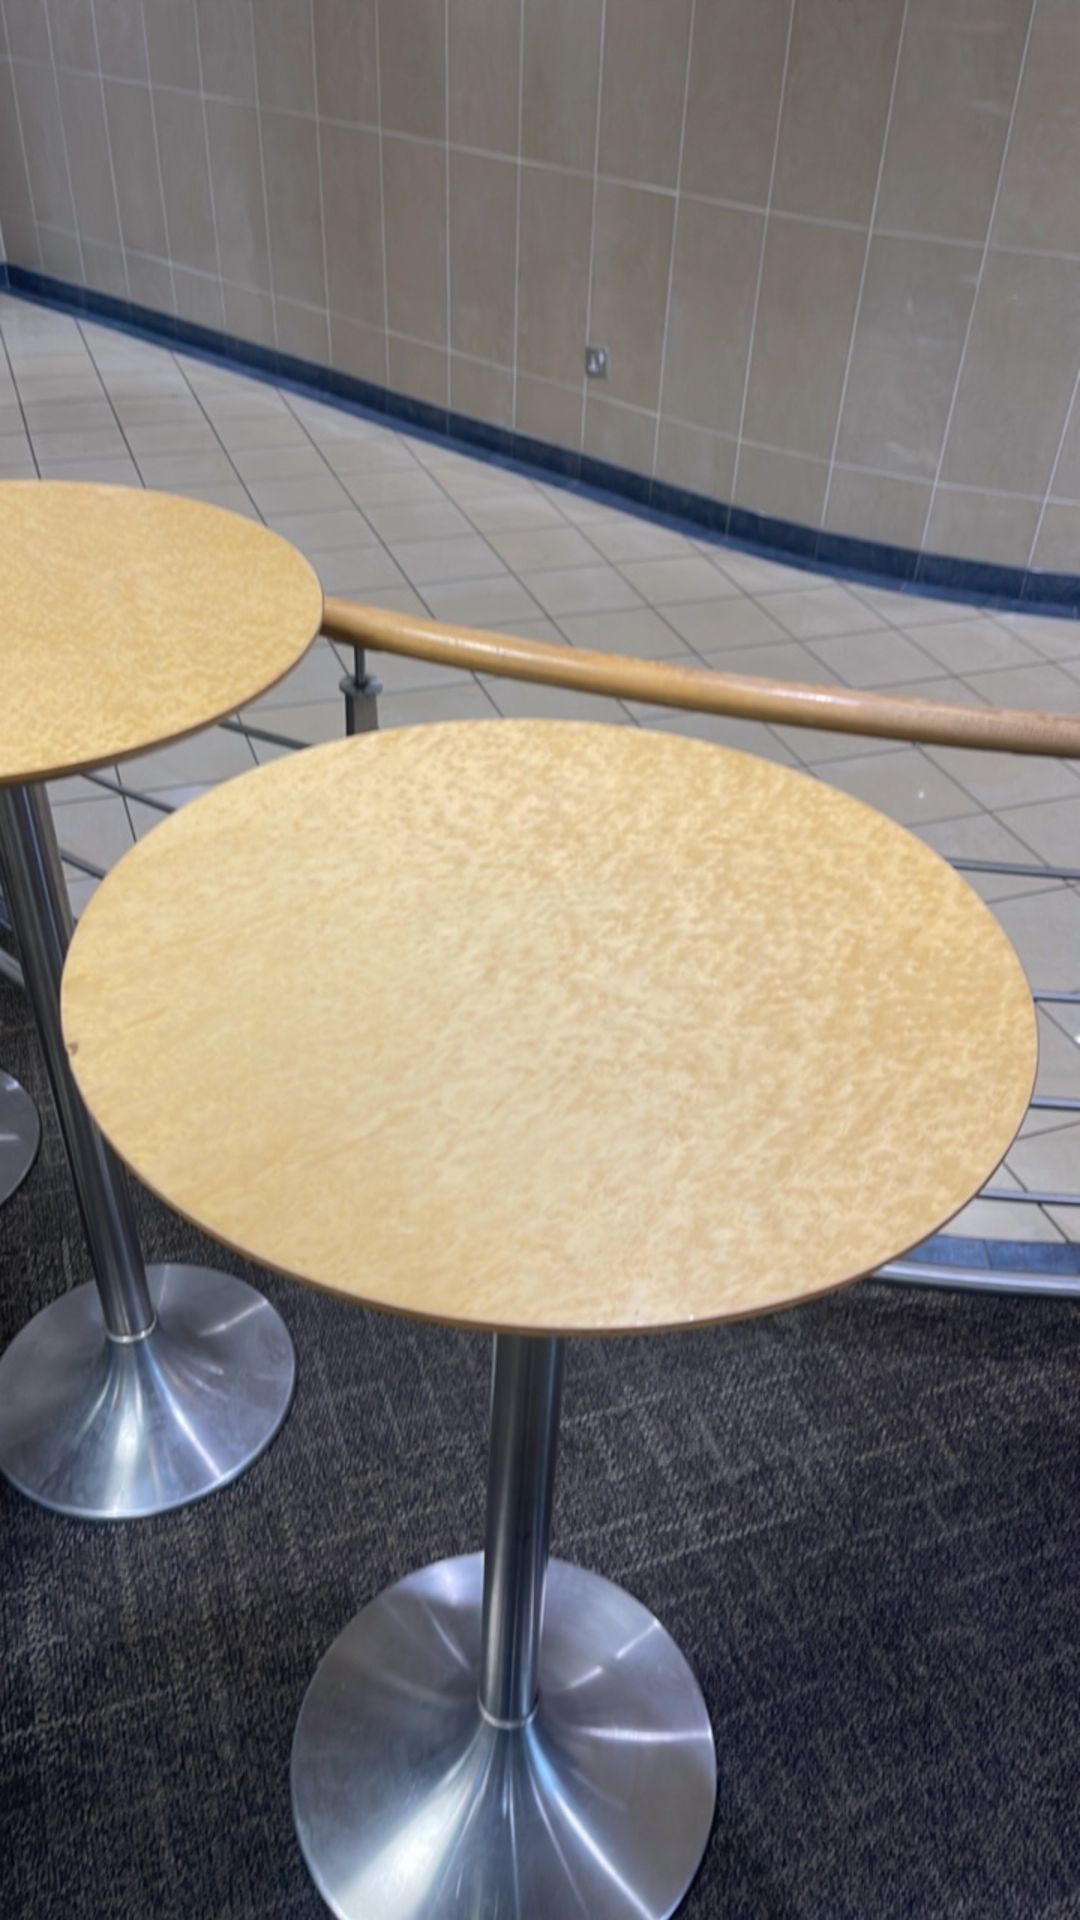 4 x Poseur Tables & 1 x Square Table - Image 6 of 6